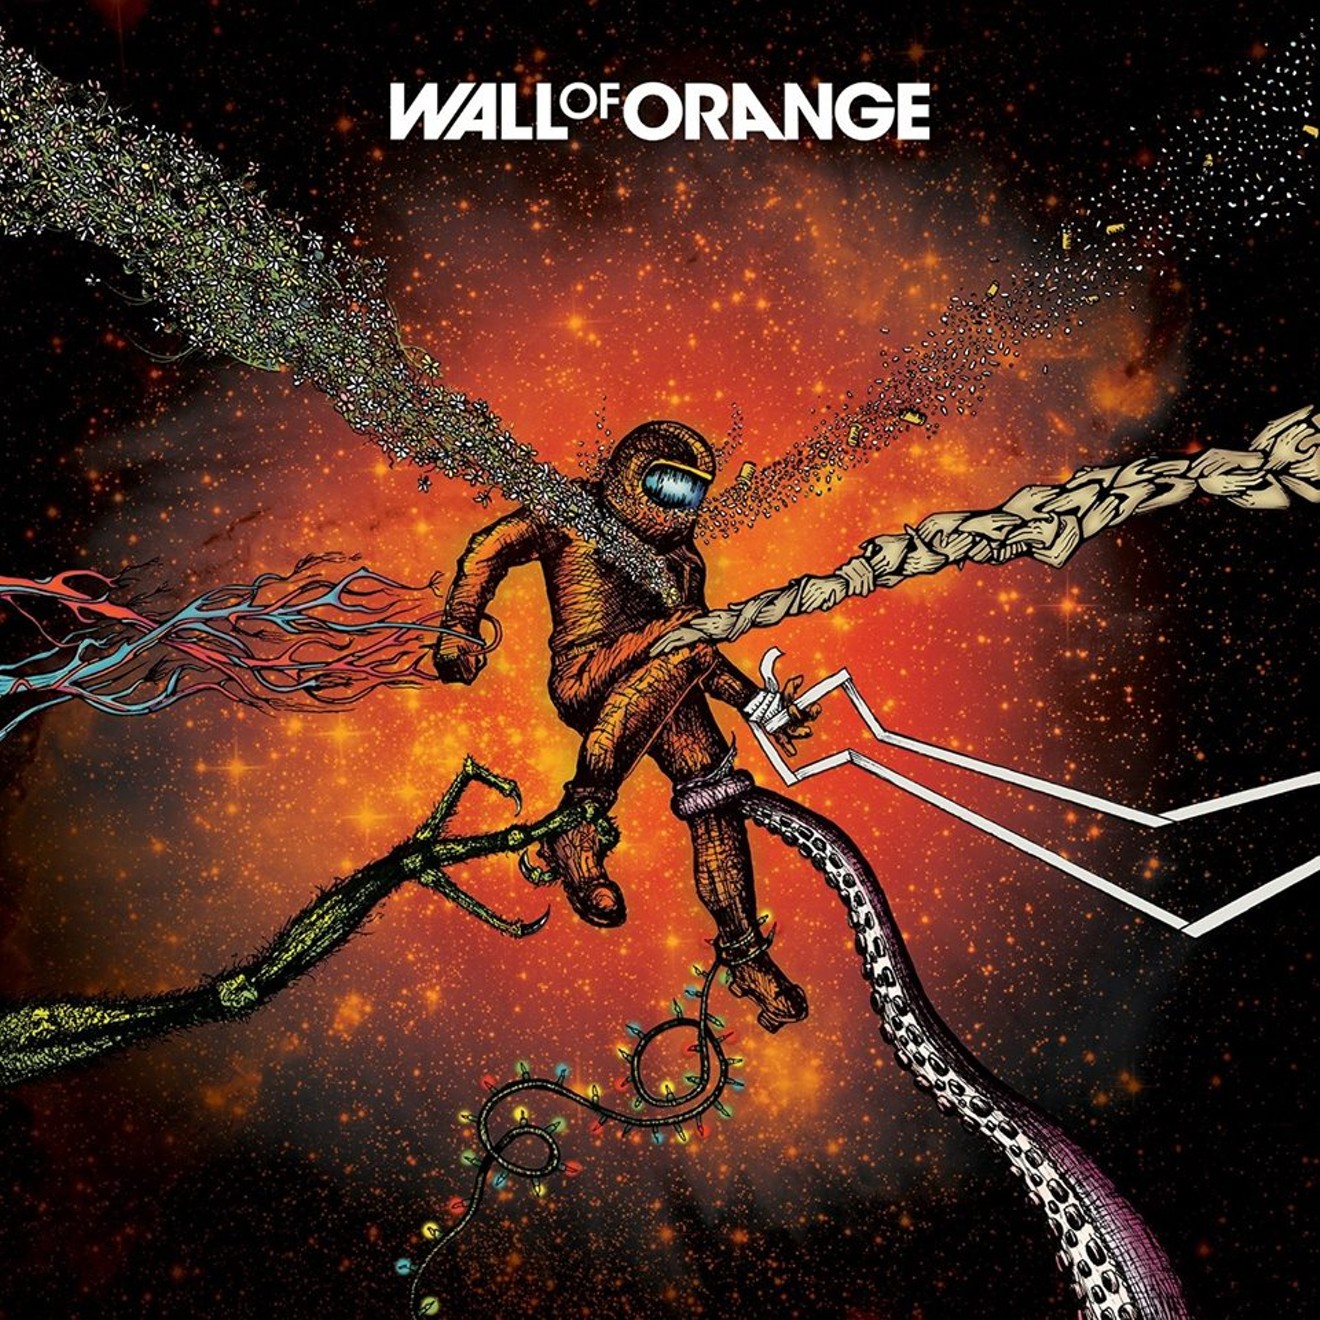 Wall of Orange released their debut in August. They'll play it live for the first time on Saturday.